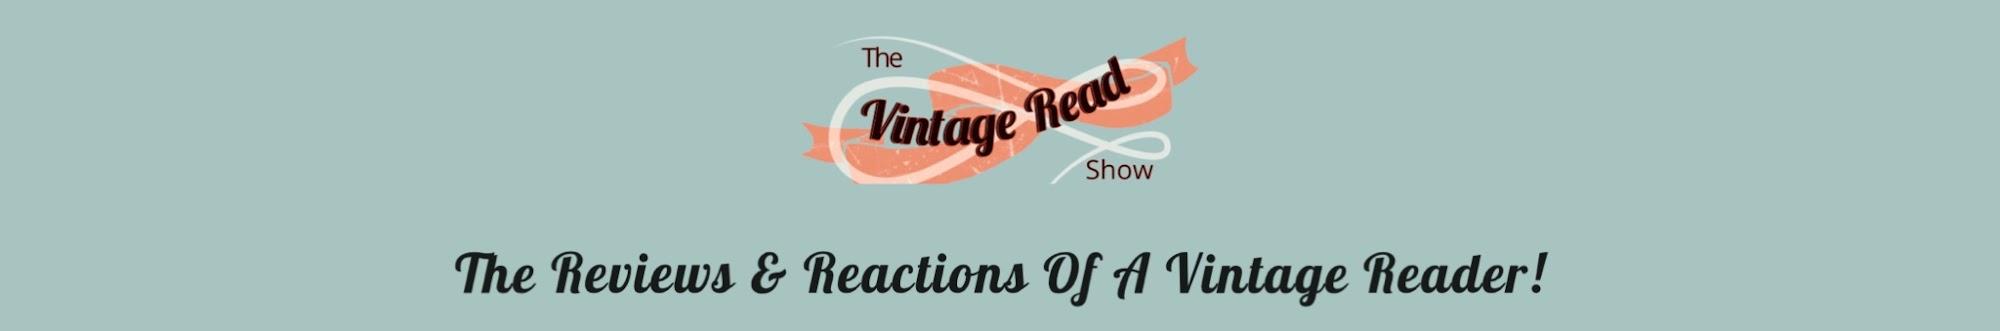 The Vintage Read Show